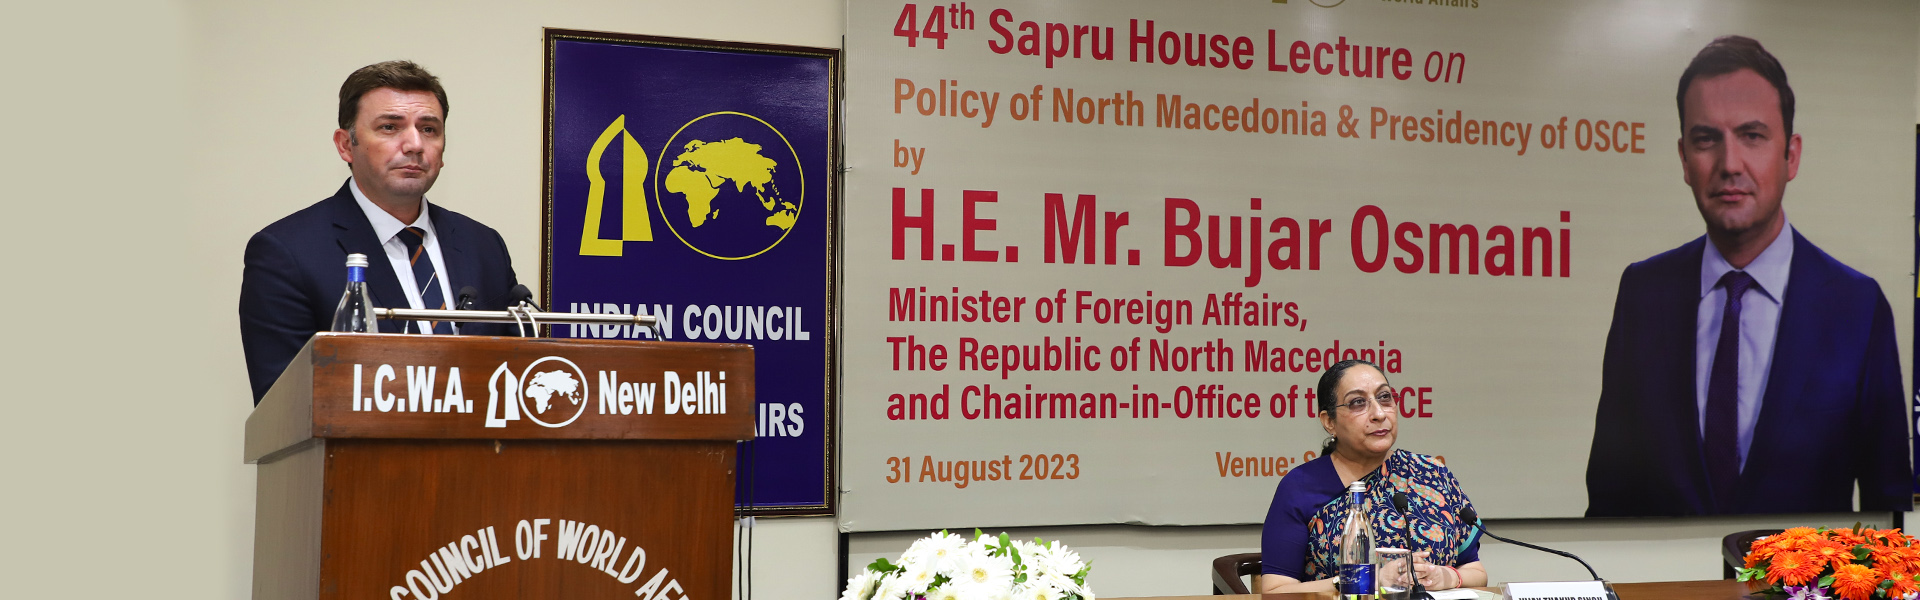 H.E. Bujar Osmani, Minister of Foreign Affairs, The Republic of North Macedonia and Chairman-in-Office of the OSCE delivering 44th Sapru House Lecture on “Policy of North Macedonia and Presidency of OSCE” at Sapru House, 31 August 2023 